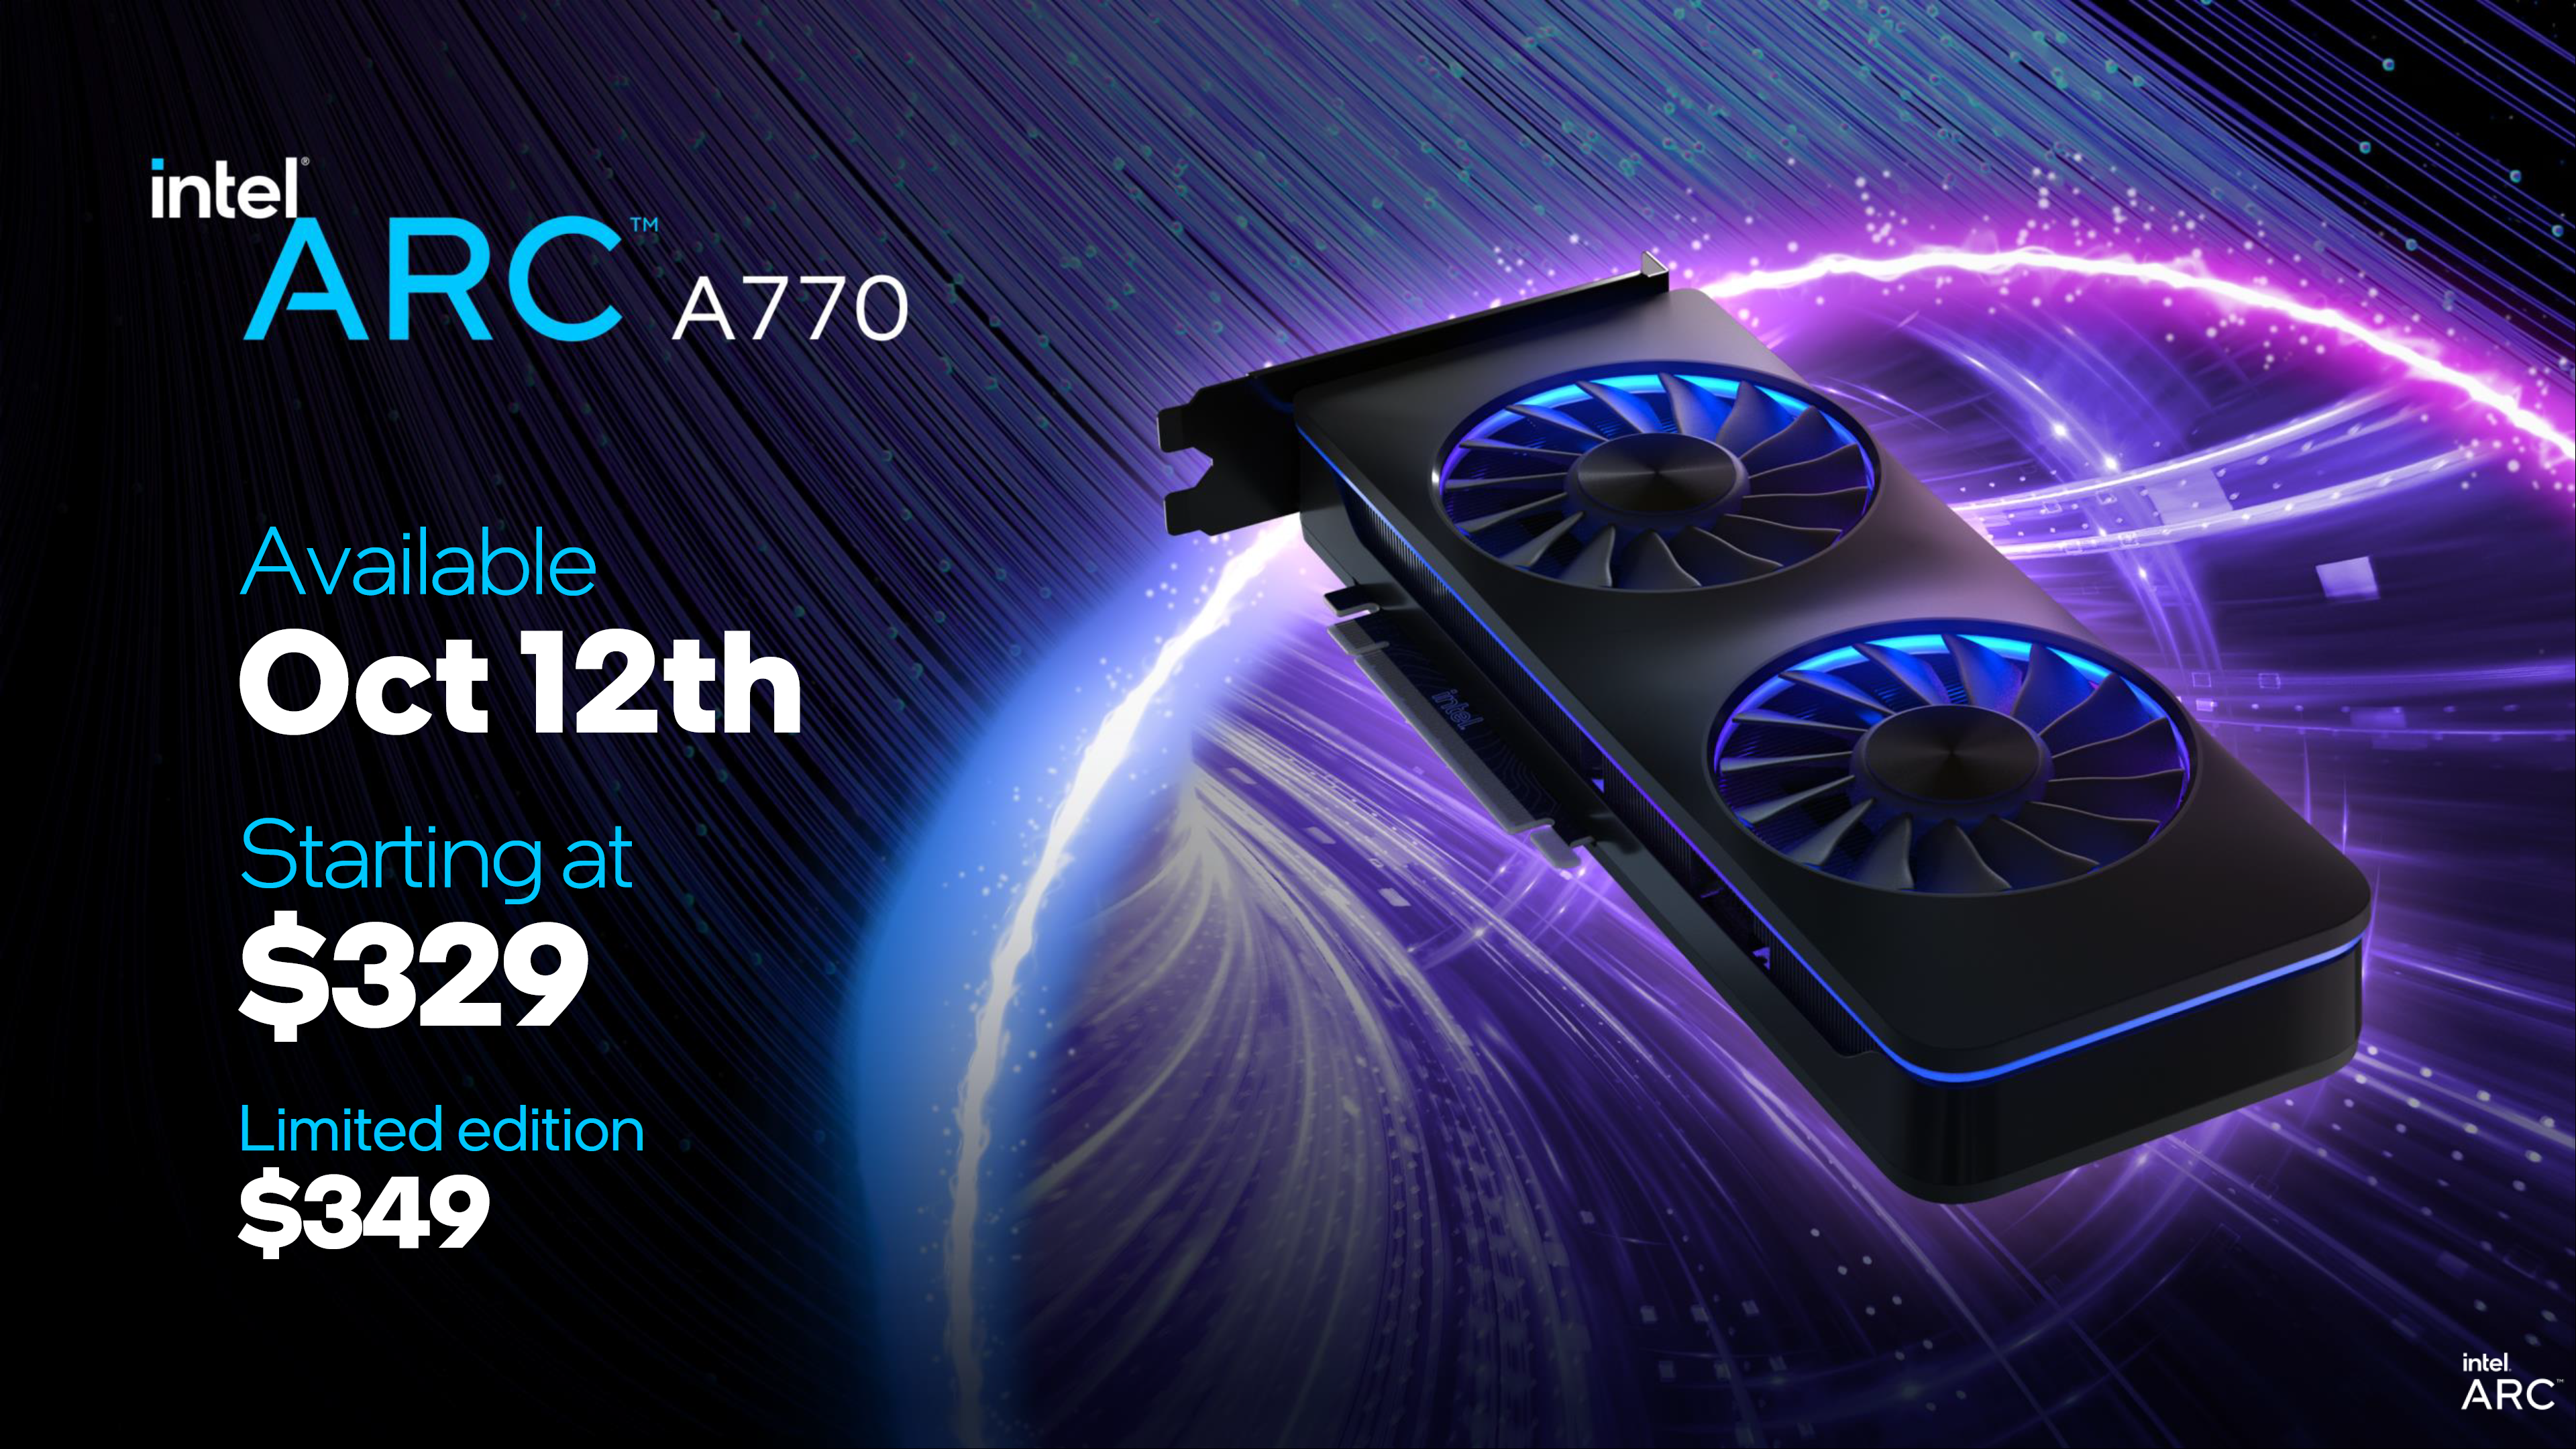 Intel-Arc-A770-Arc-A750-12th-October-Launch-Confirmd-329-289-US-Price-_6.png